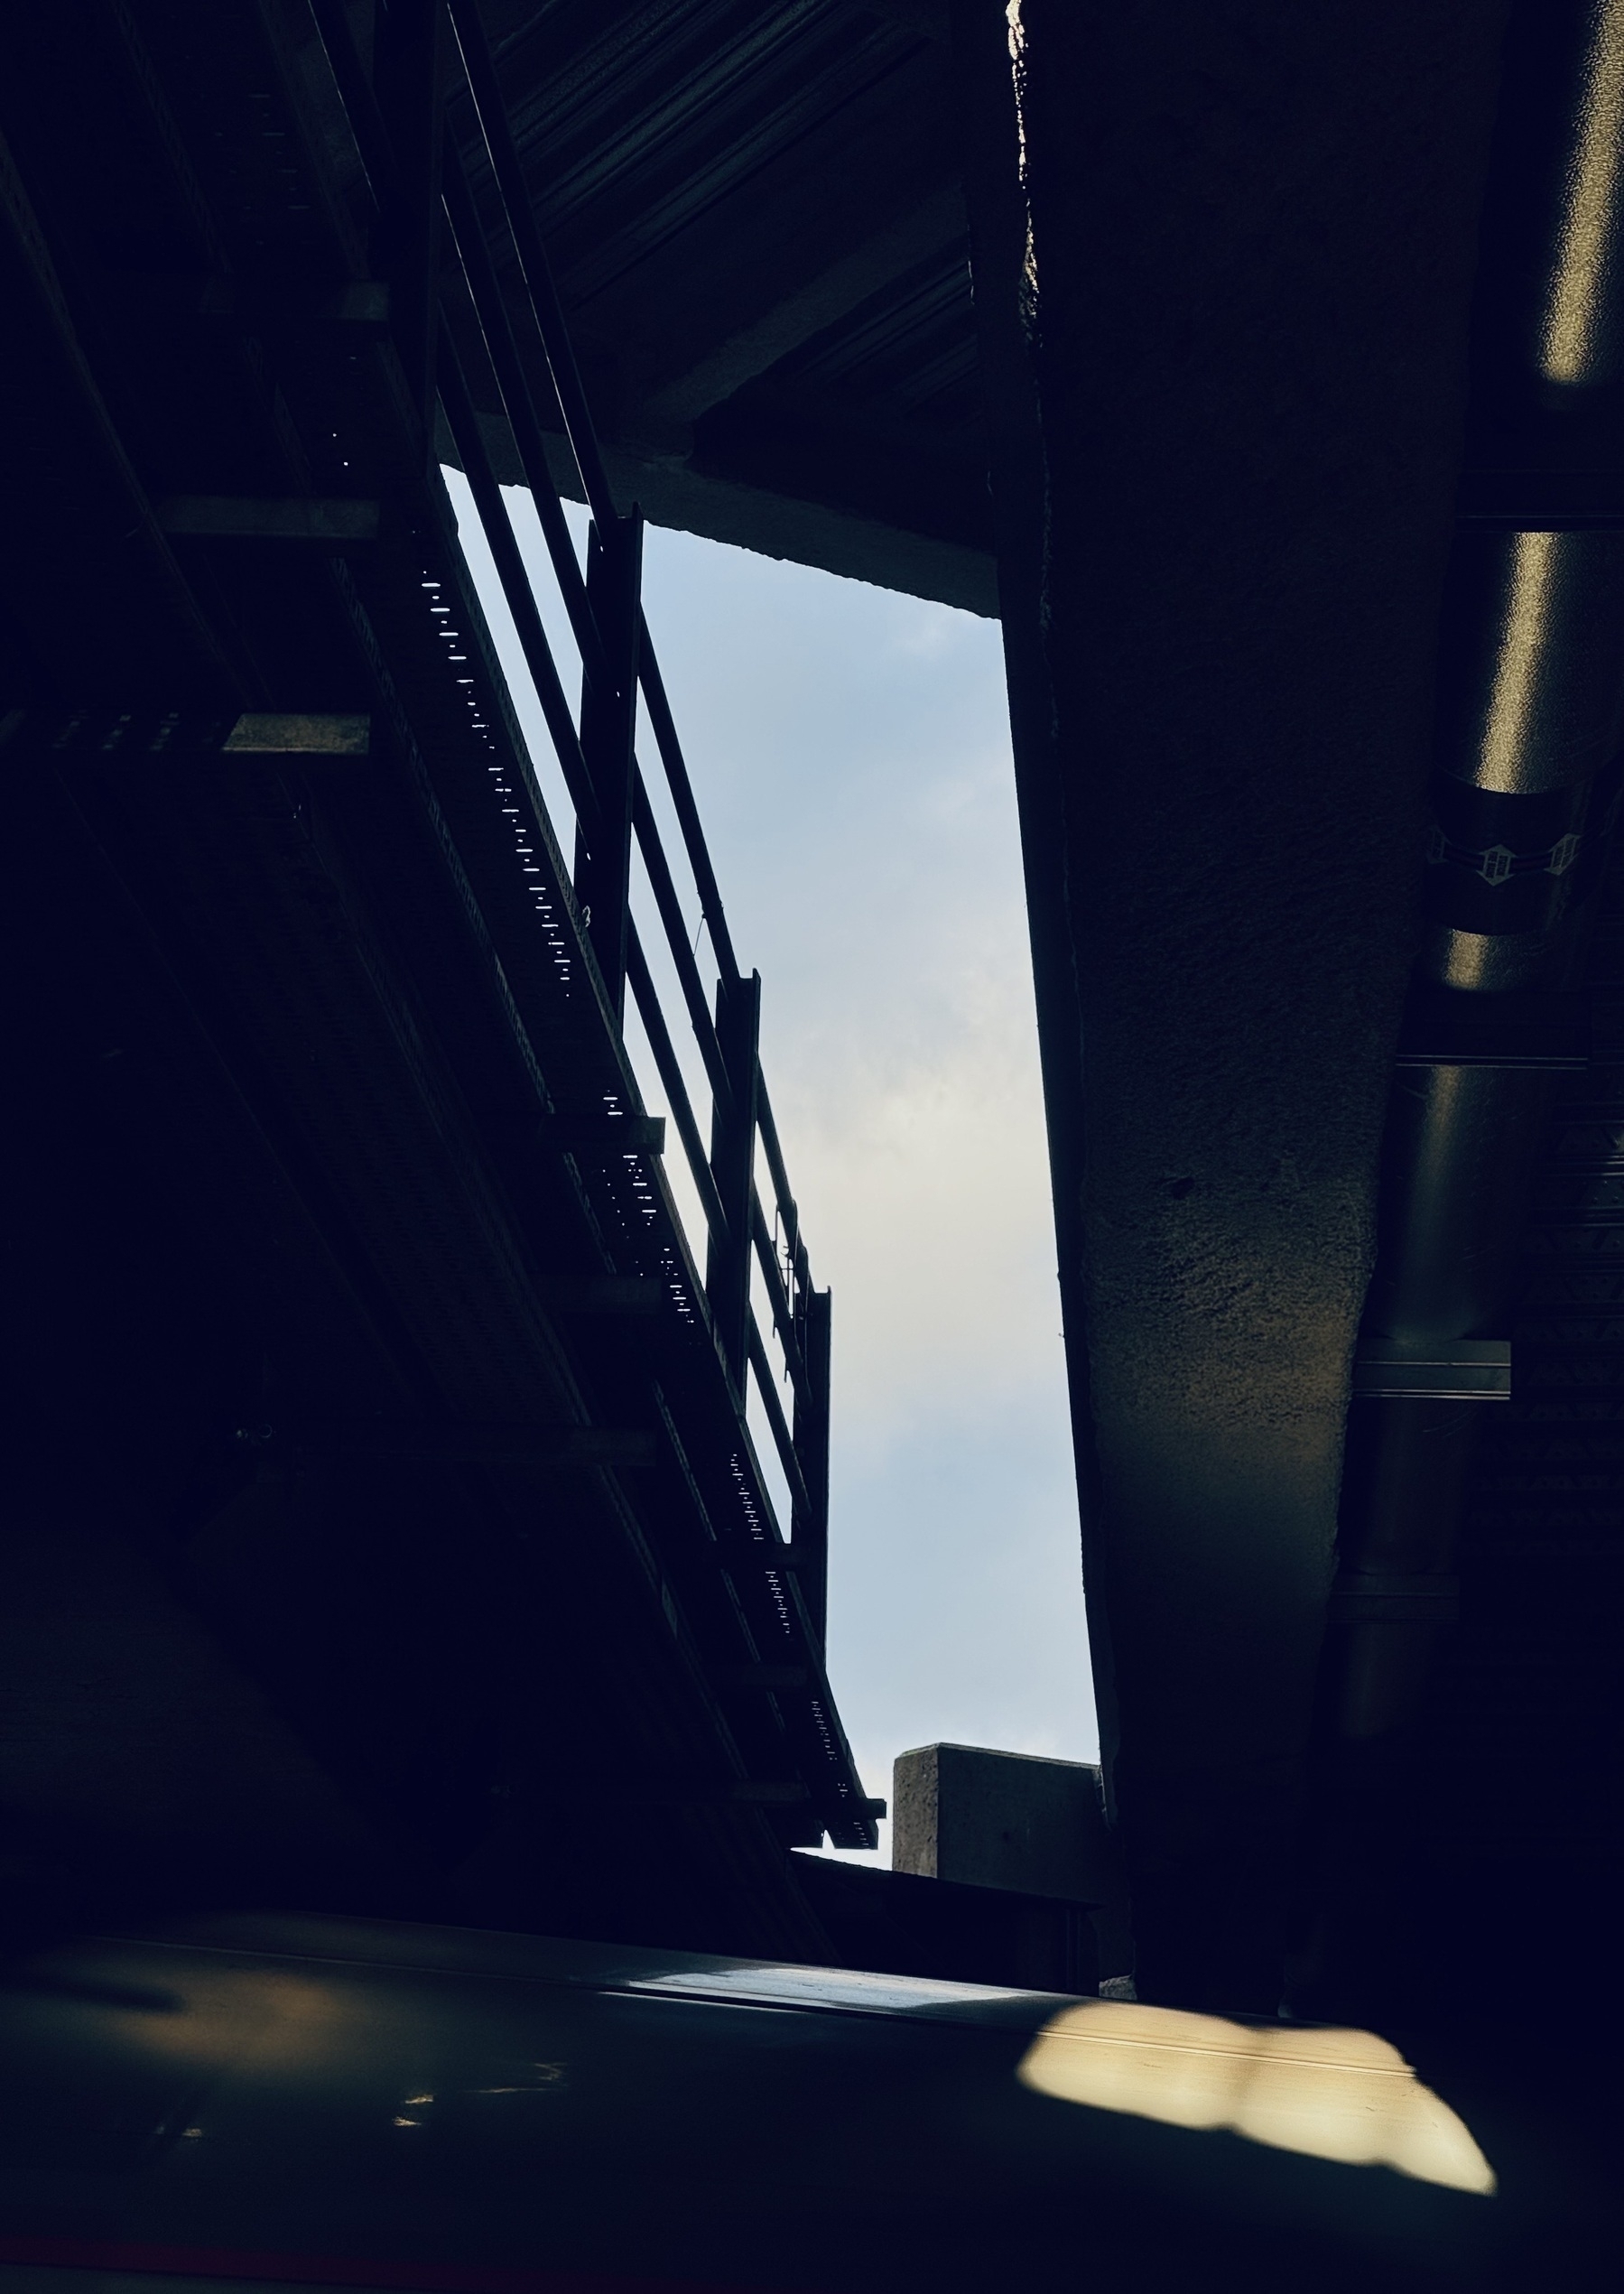 A sliver of sky seen through the side of a train station.